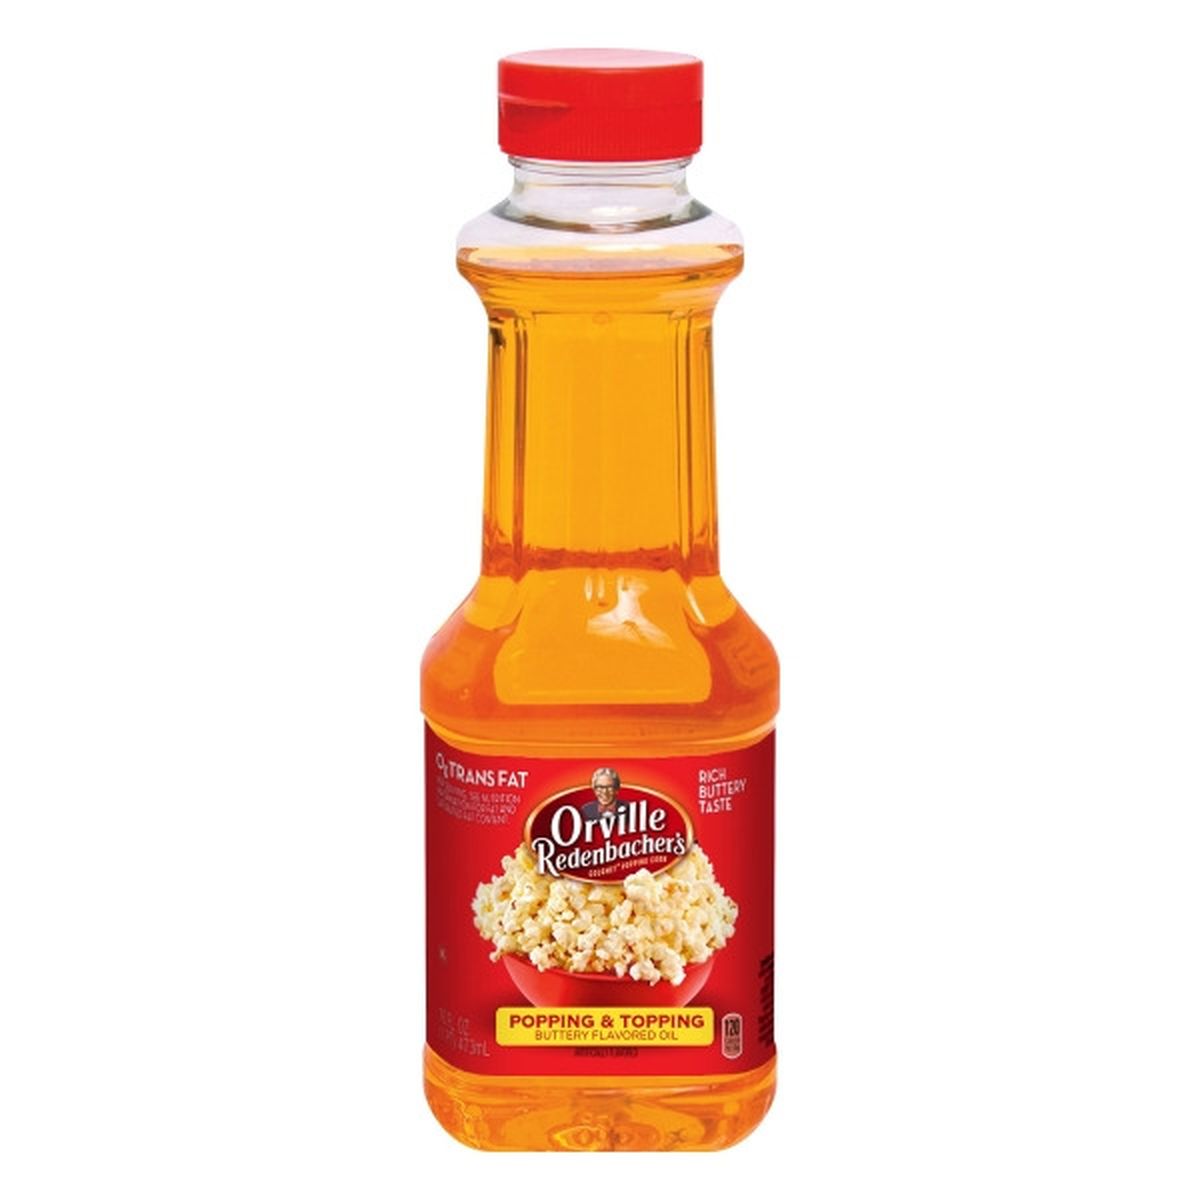 Calories in Orville Redenbacher's Popping & Topping Oil, Buttery Flavored